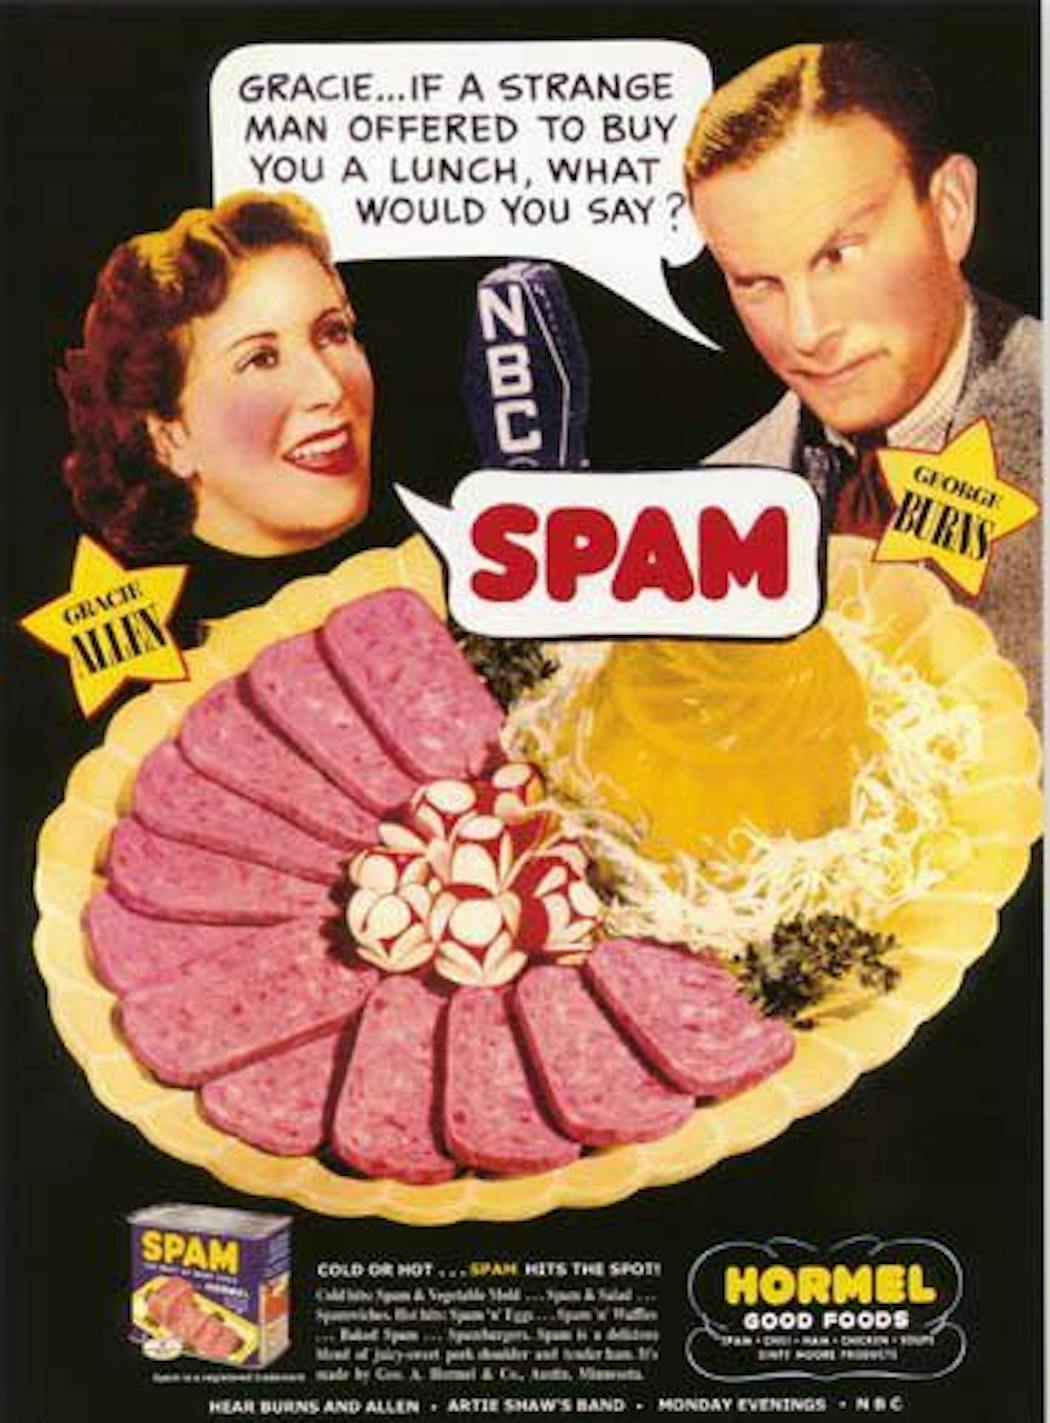 SPAM magazine ad featuring George Burns and Gracie Allen, 1940